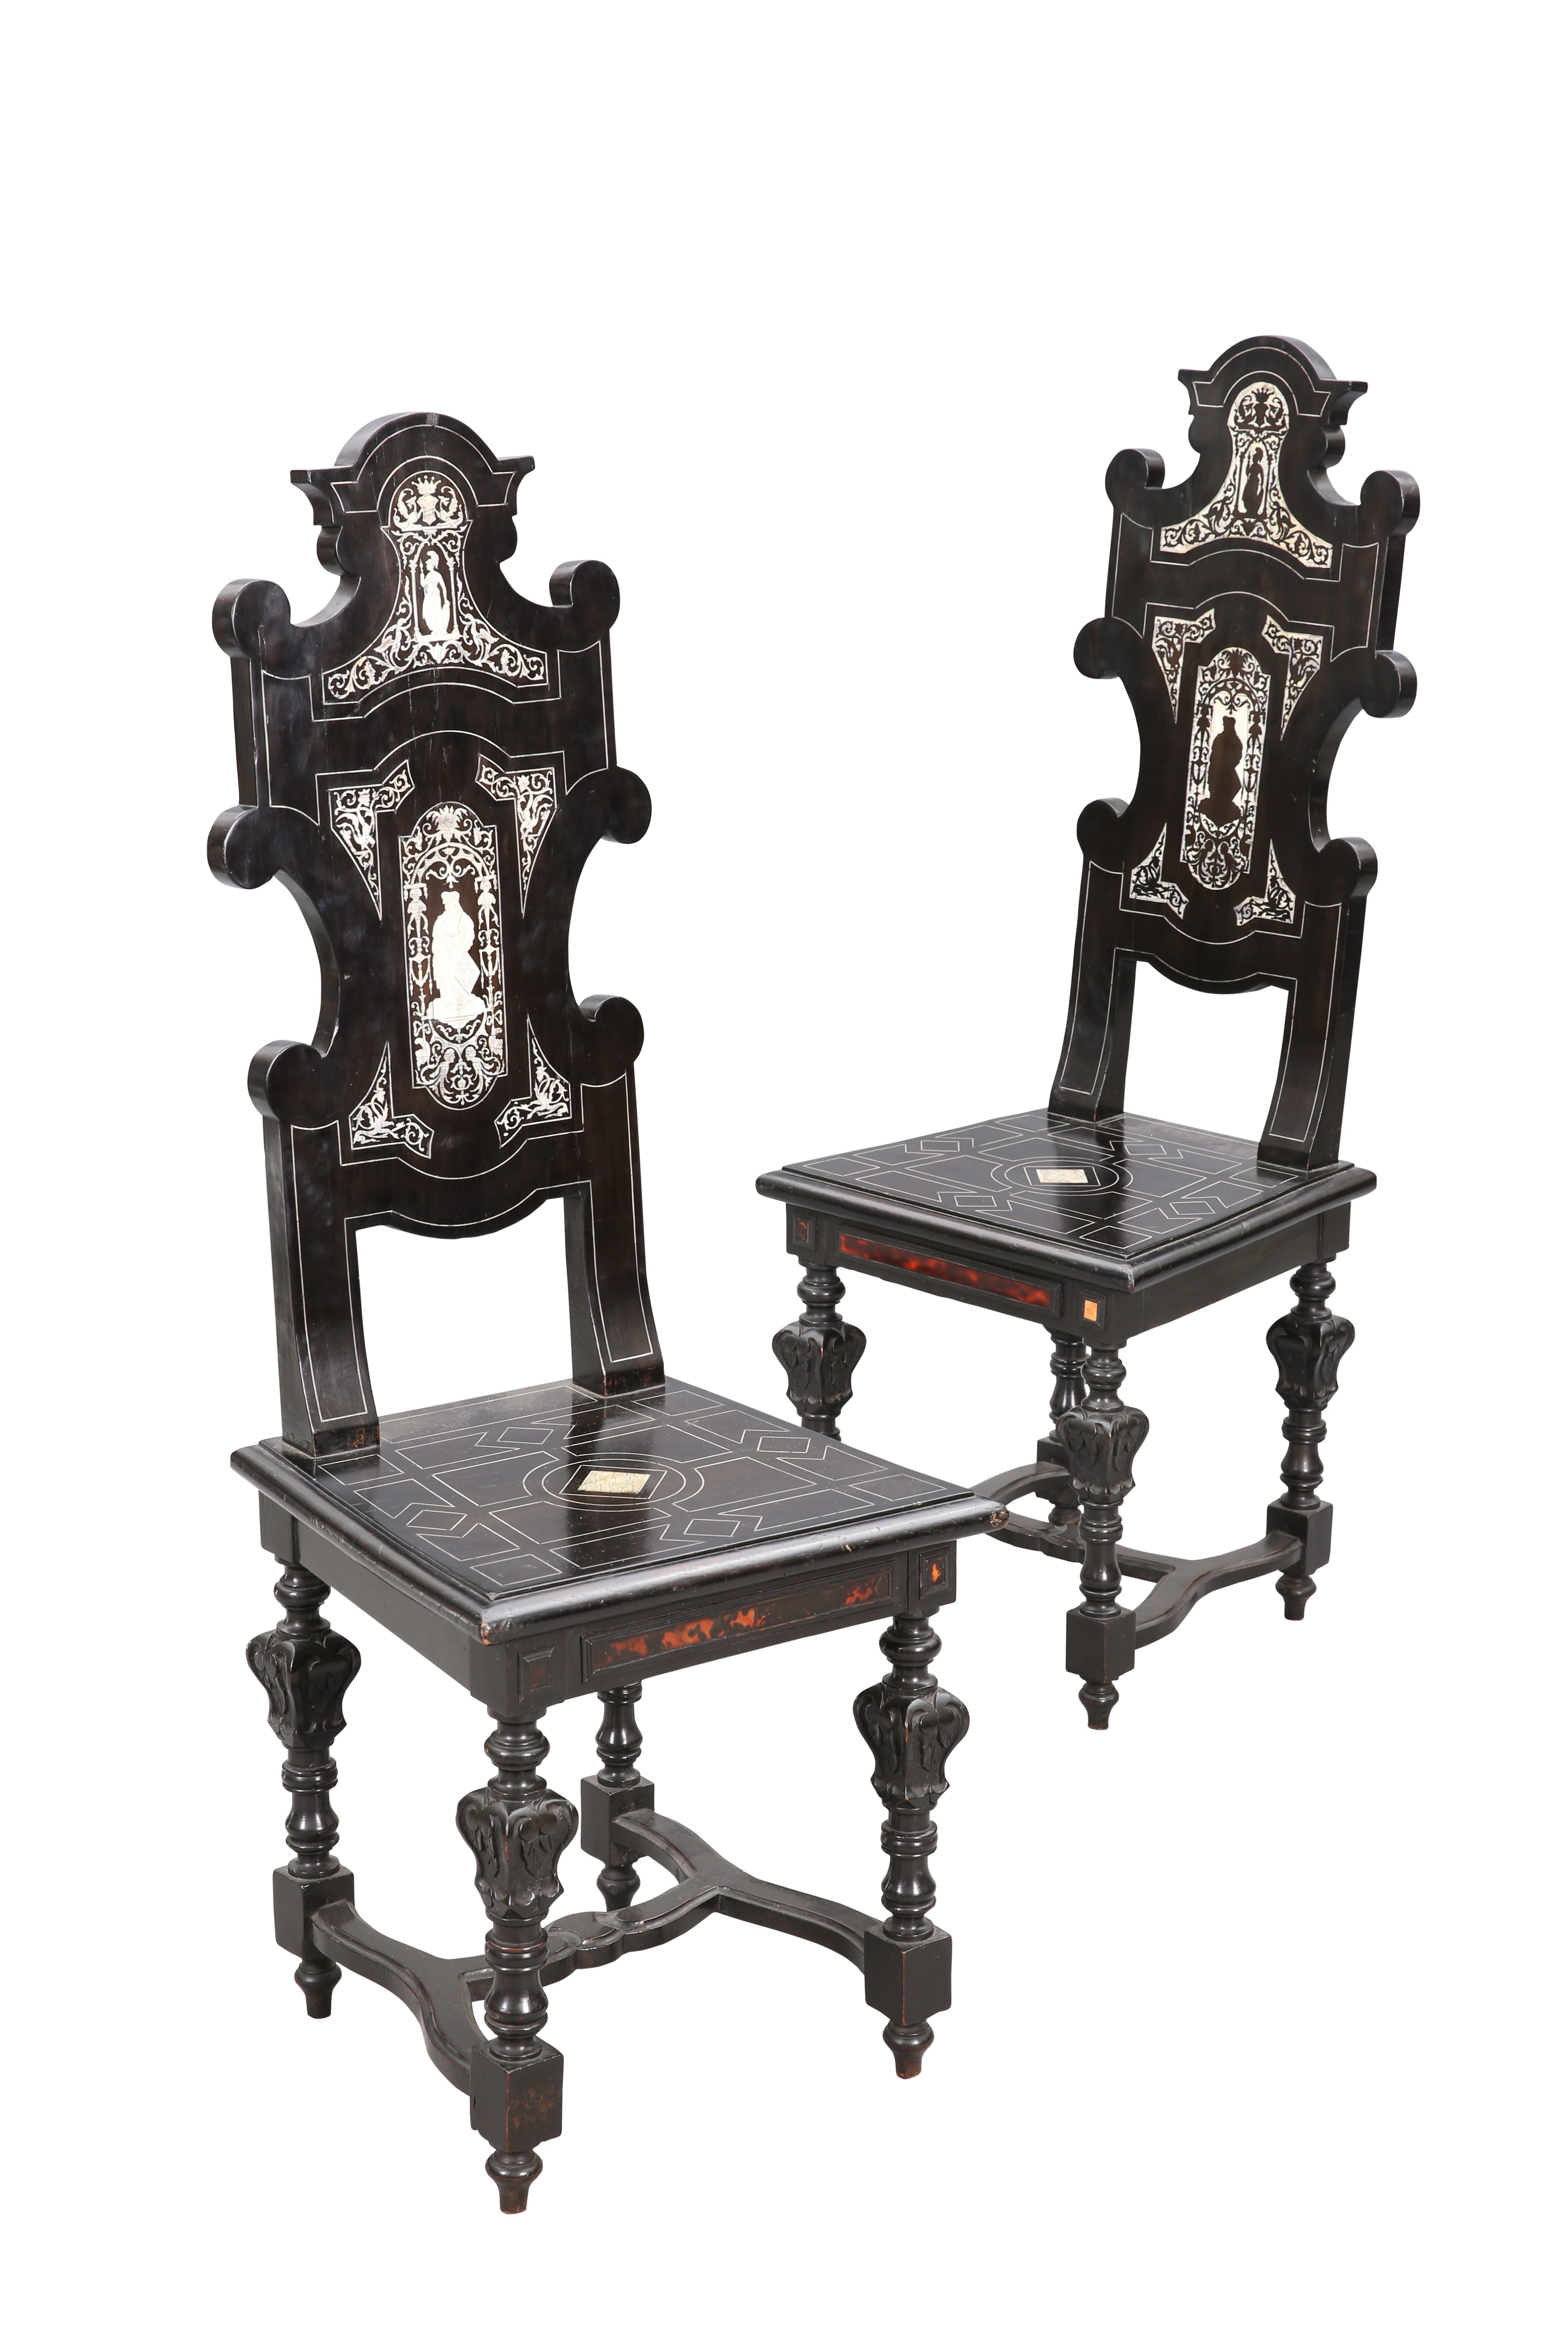 A PAIR OF 17TH CENTURY STYLE ITALIAN IVORY, SCARLET TORTOISESHELL AND EBONISED HALL CHAIRS